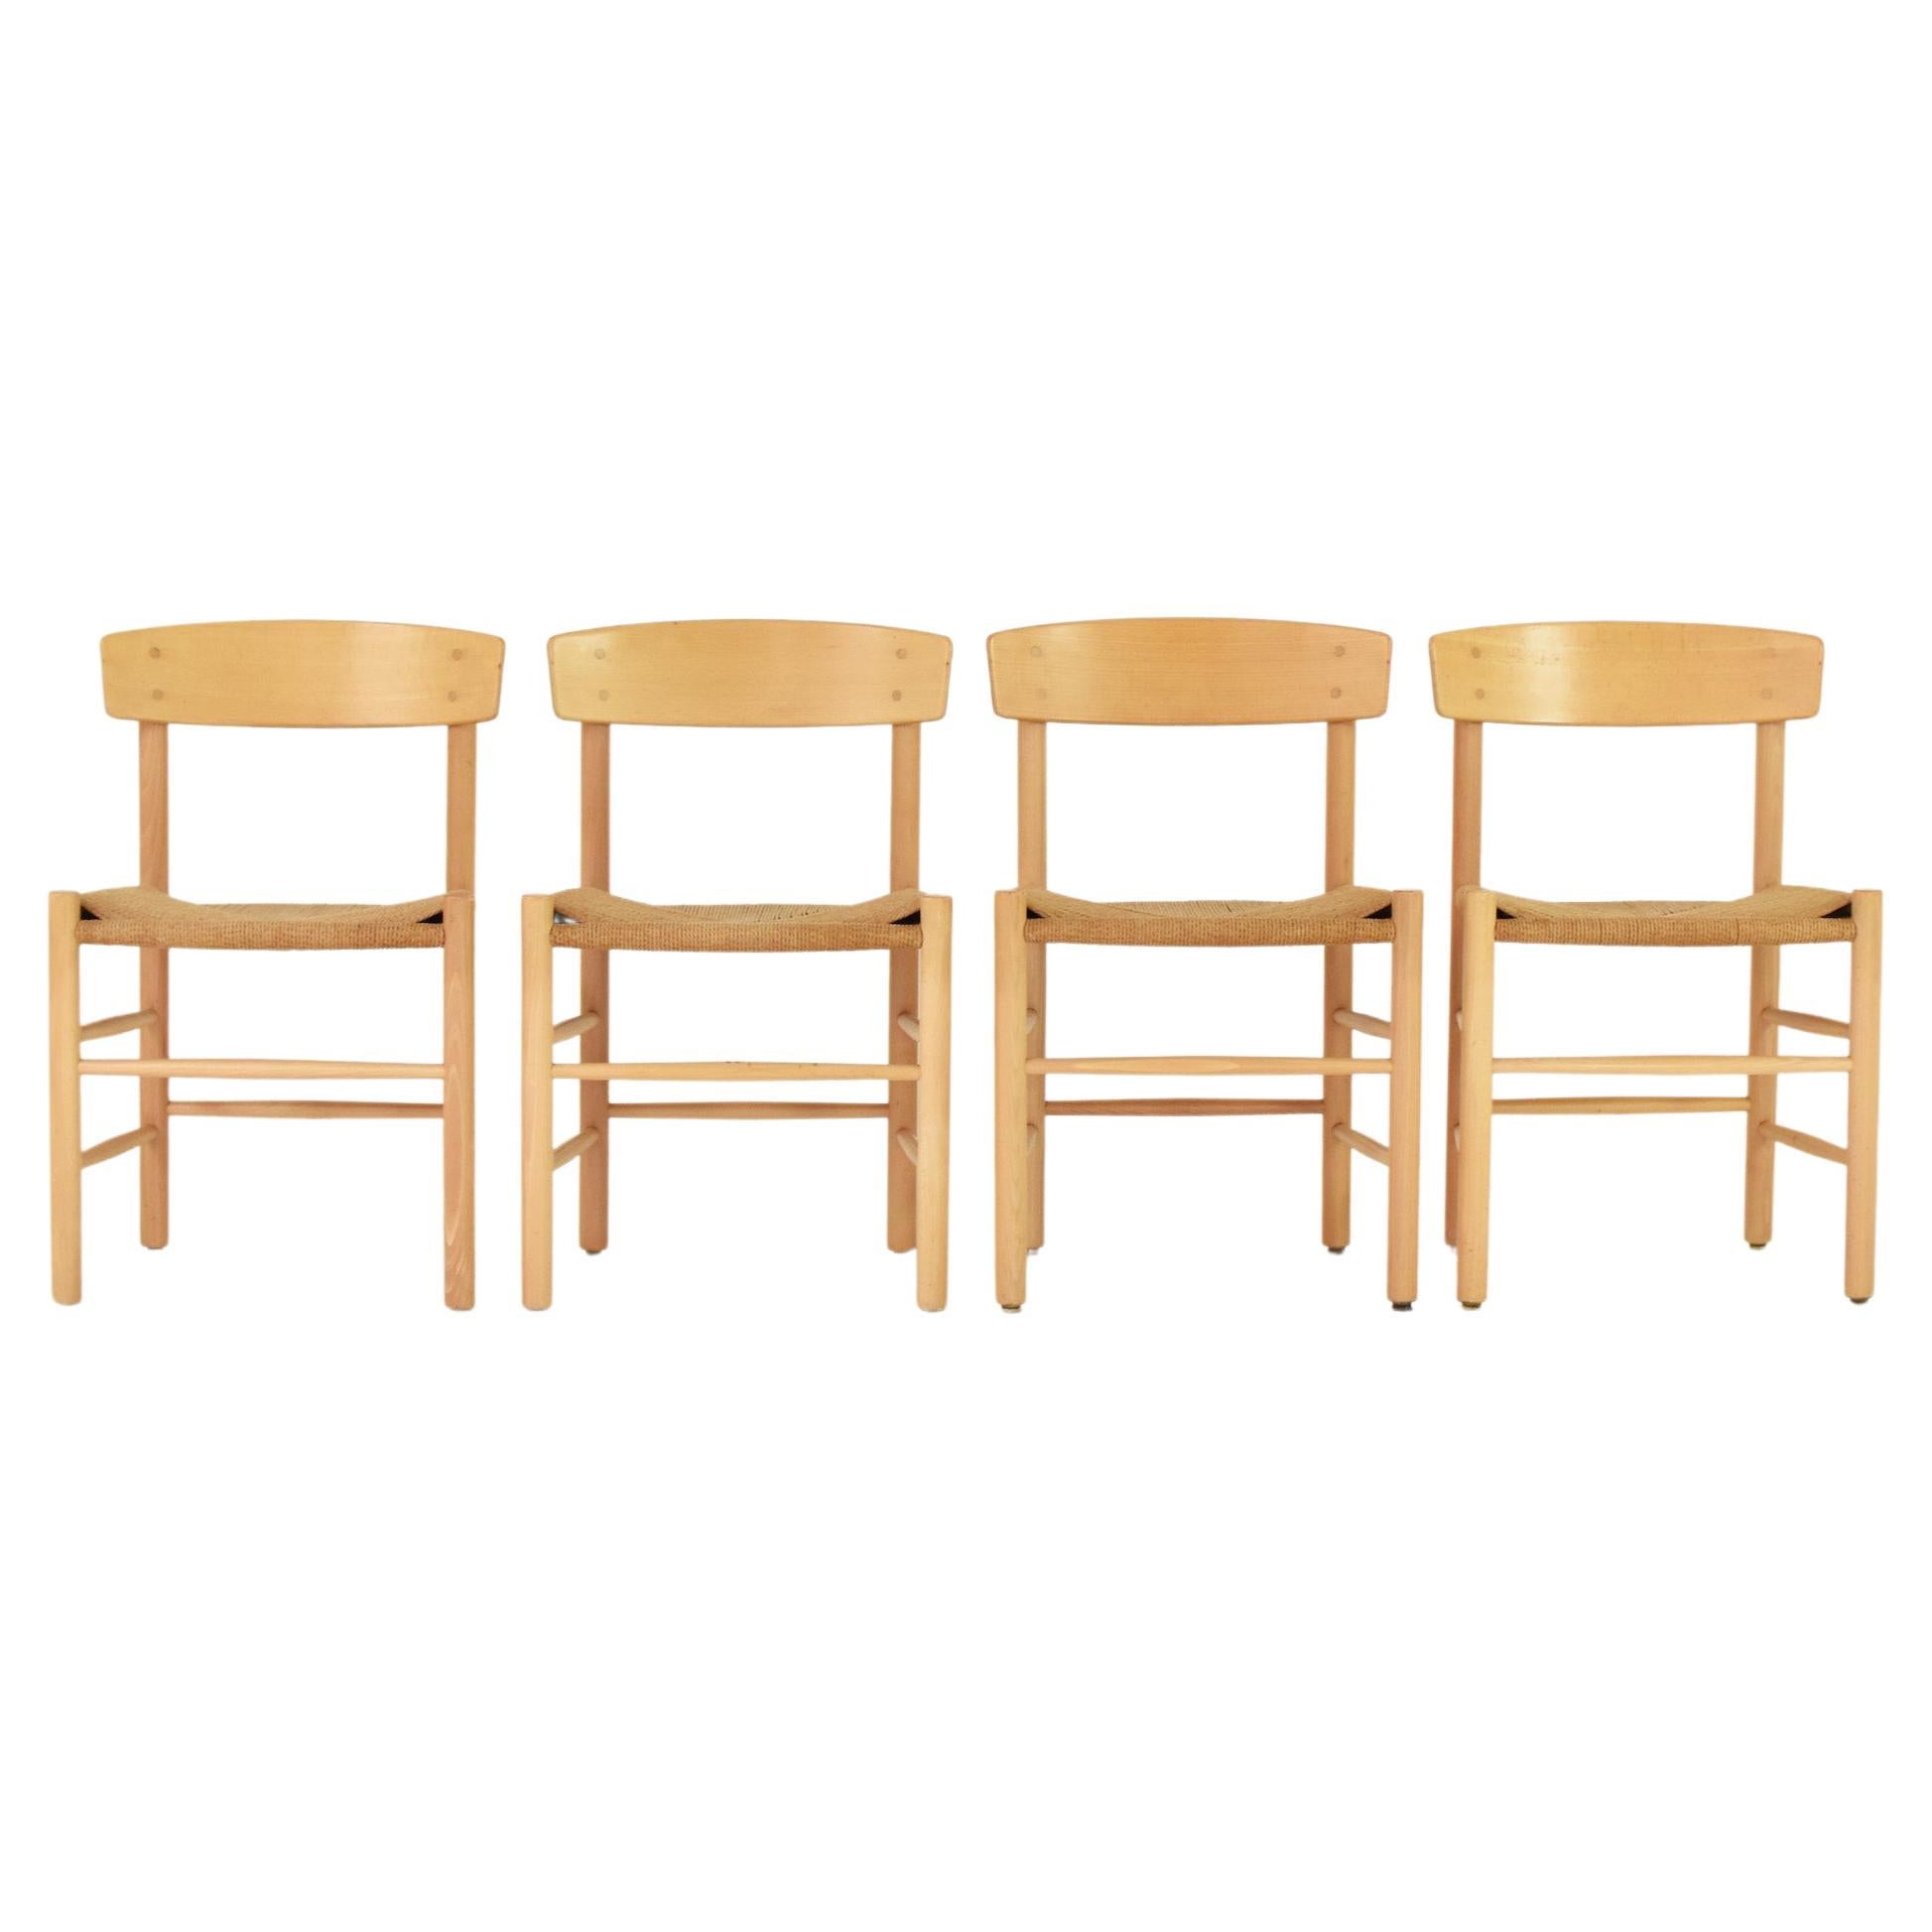 Set of 4 ‘J39’ Dining Chairs by Børge Mogensen for FDB Møbler, Denmark, 1960s